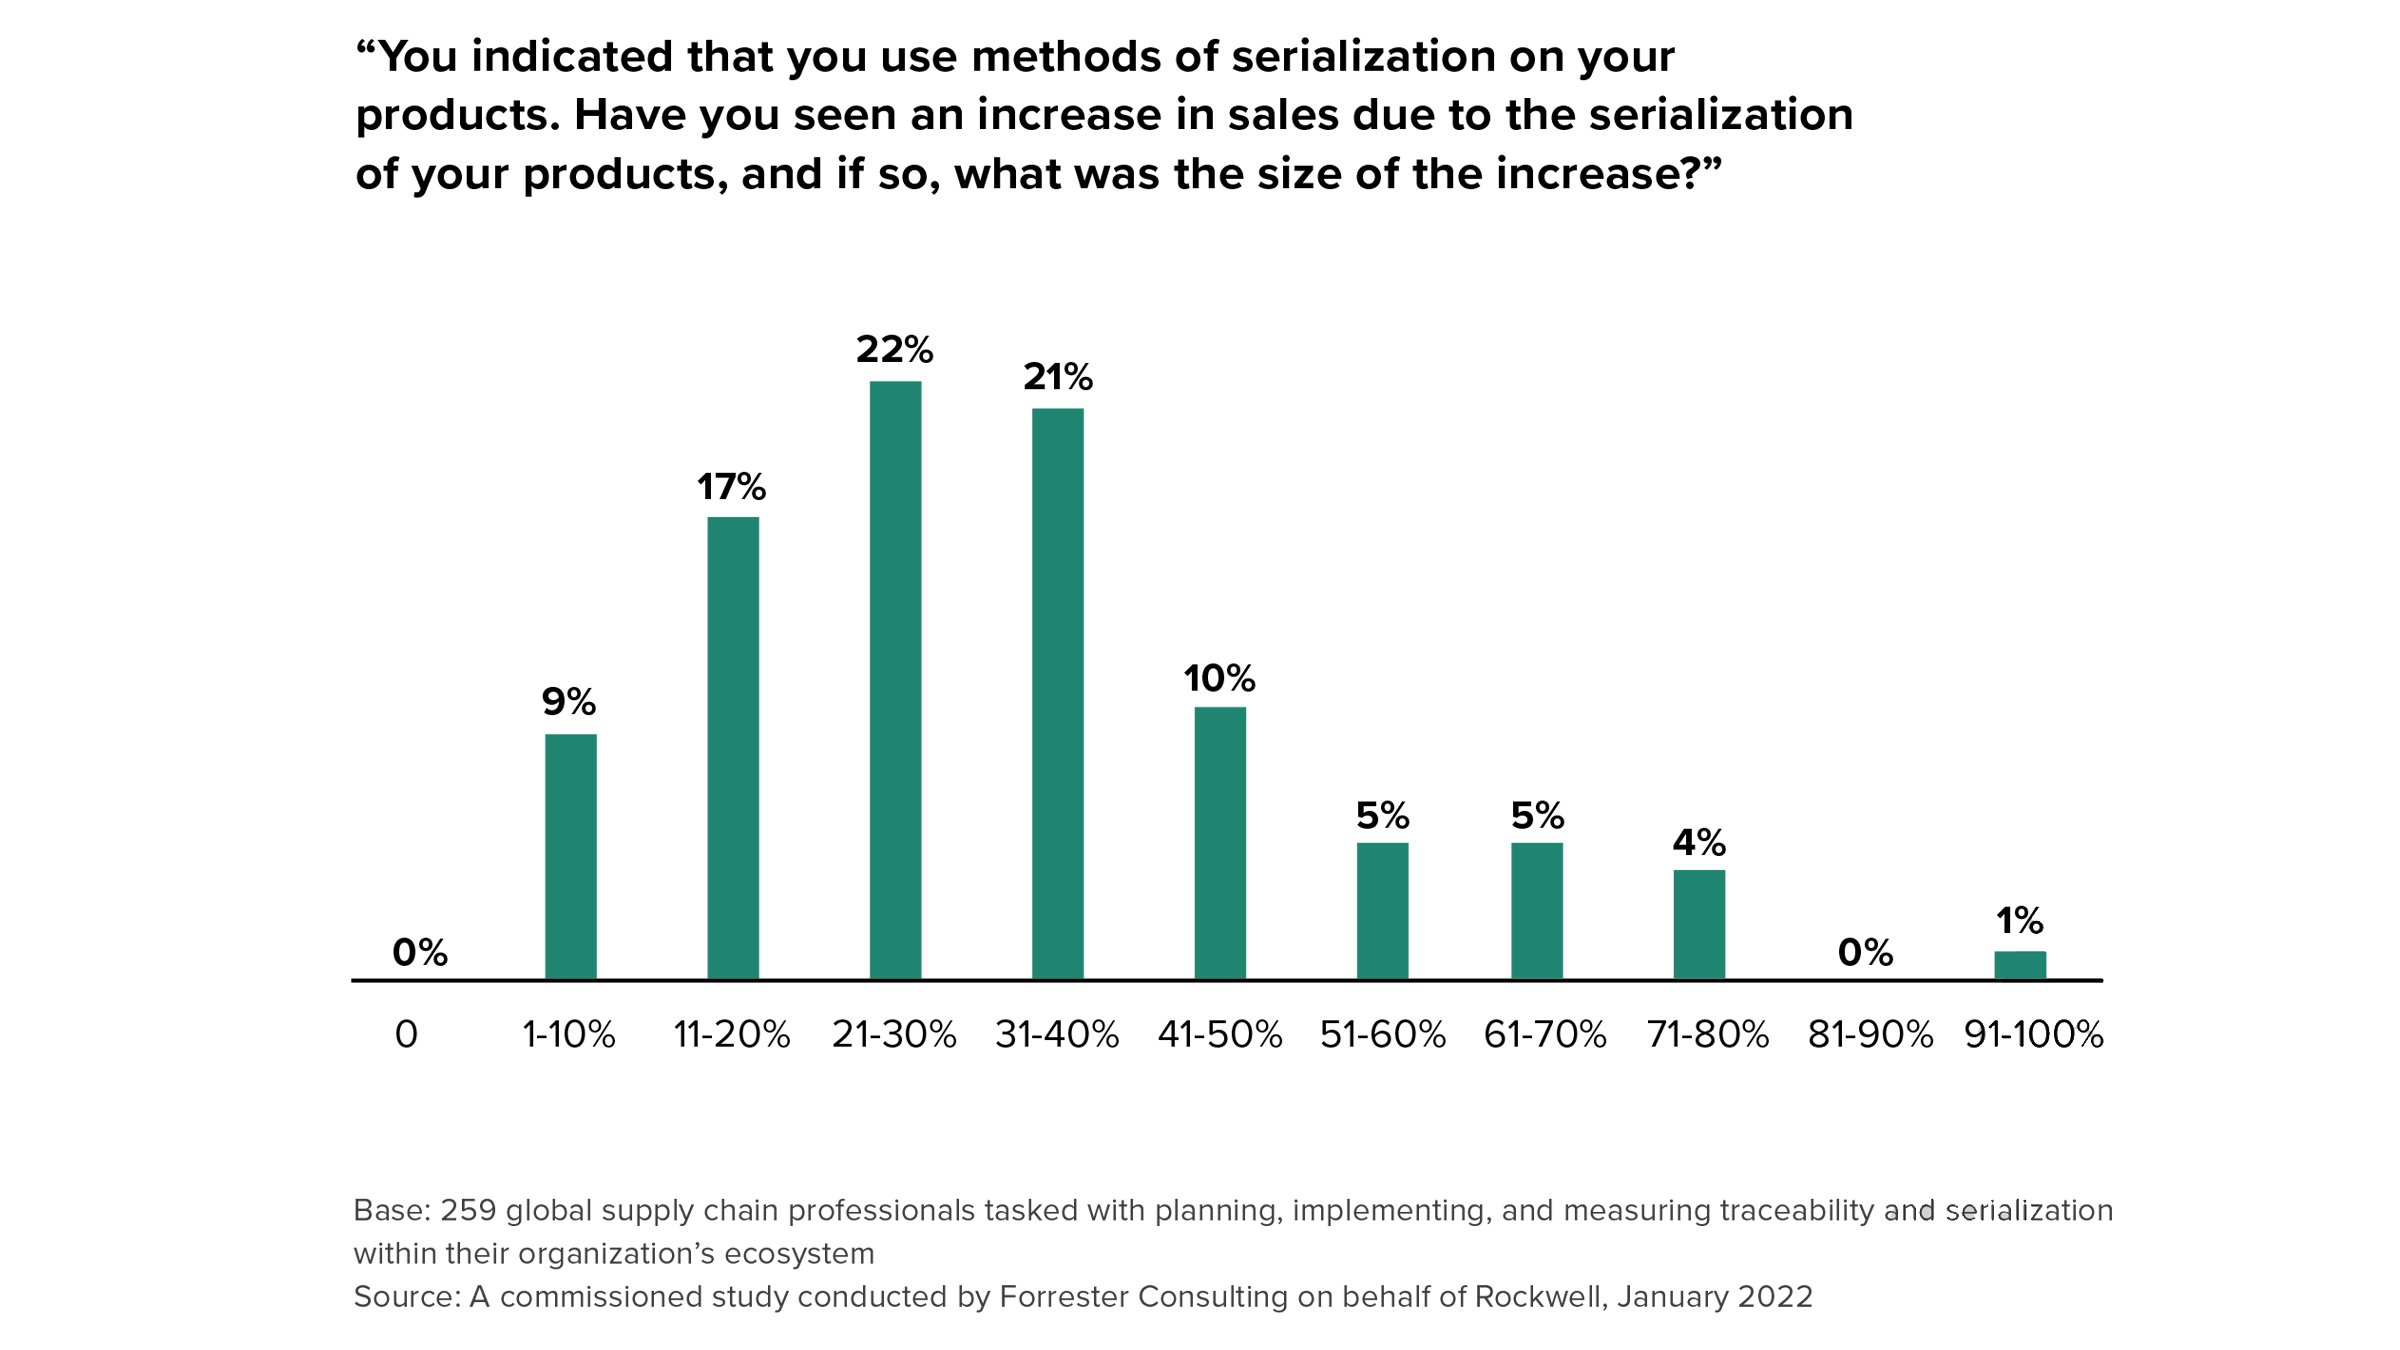 Infographic bar chart and statistics for responses to the survey question "You indicated that you use methods of serialization on your products. Have you seen an increase in sales due to the serialization of your products, and if so, what was the size of the increase?"